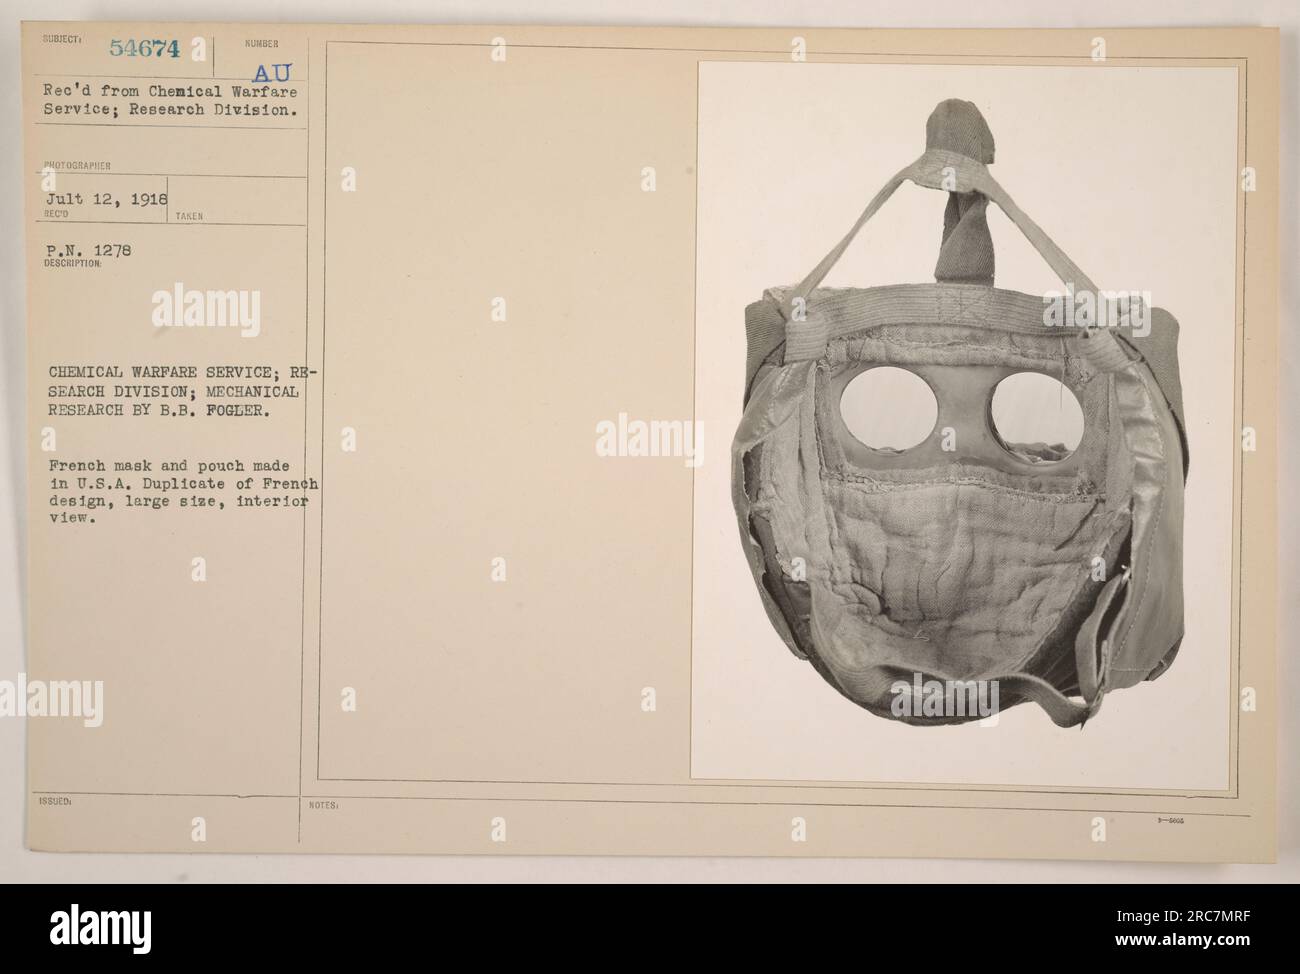 In this photograph taken on July 12, 1918, it depicts a French mask and pouch, made in the USA, utilized by the Chemical Warfare Service's Research Division for mechanical research by B.B. Fogler. The mask is a duplicate of the French design, in a large size with an interior view. (Source: Photographs of American Military Activities during World War One) Stock Photo